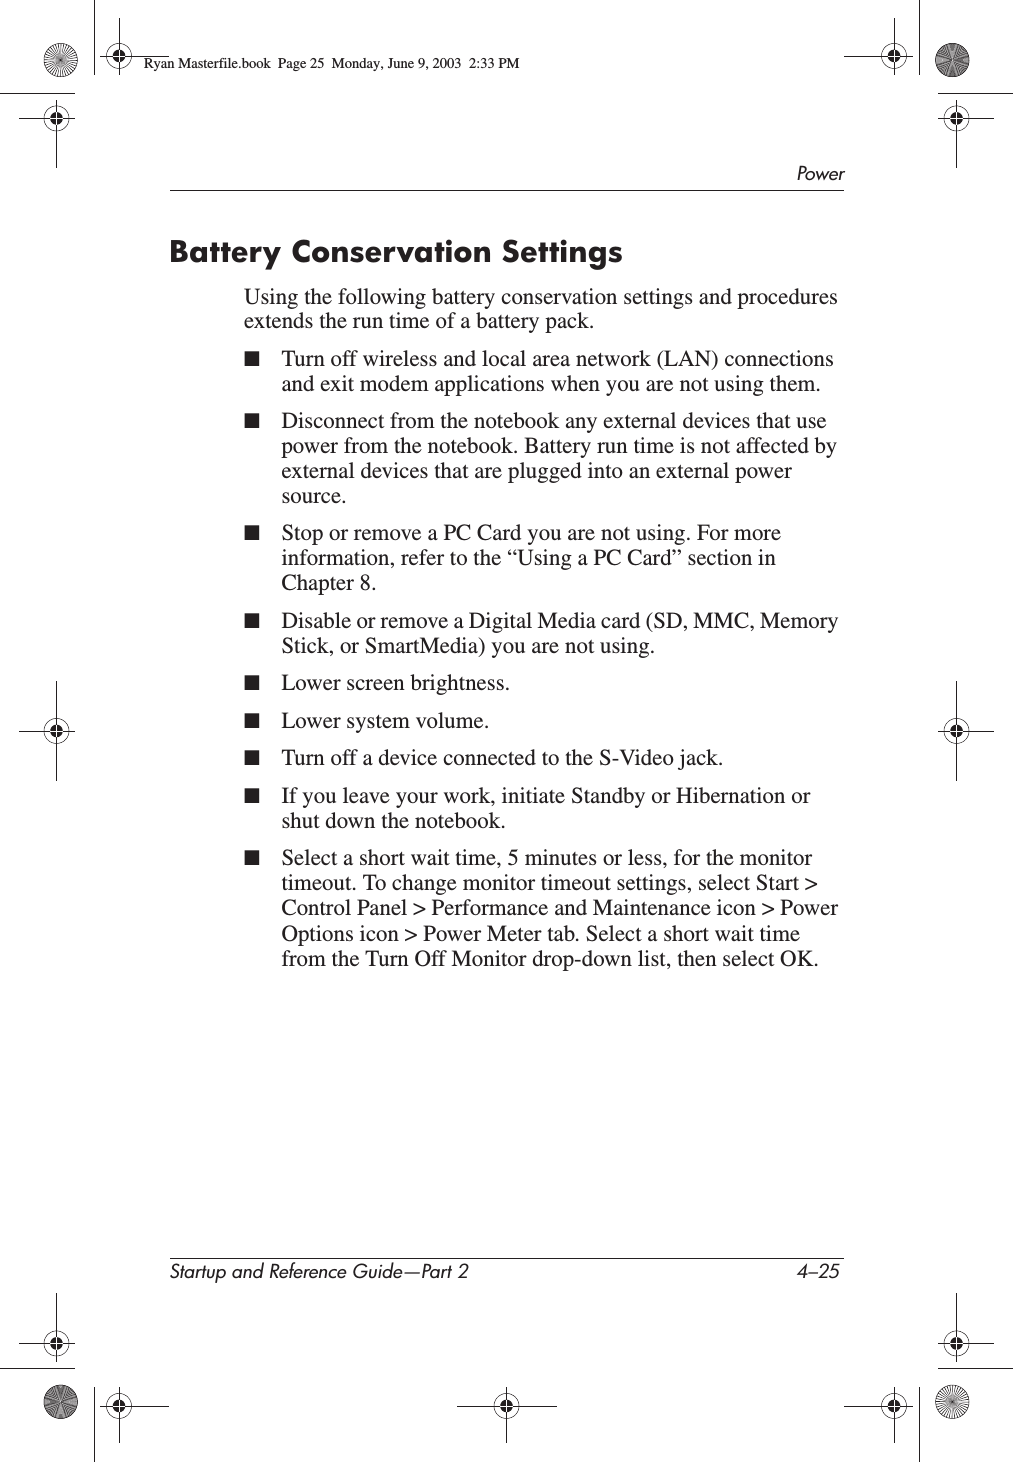 PowerStartup and Reference Guide—Part 2 4–25Battery Conservation SettingsUsing the following battery conservation settings and procedures extends the run time of a battery pack.■Turn off wireless and local area network (LAN) connections and exit modem applications when you are not using them.■Disconnect from the notebook any external devices that use power from the notebook. Battery run time is not affected by external devices that are plugged into an external power source.■Stop or remove a PC Card you are not using. For more information, refer to the “Using a PC Card” section in Chapter 8.■Disable or remove a Digital Media card (SD, MMC, Memory Stick, or SmartMedia) you are not using.■Lower screen brightness.■Lower system volume.■Turn off a device connected to the S-Video jack.■If you leave your work, initiate Standby or Hibernation or shut down the notebook.■Select a short wait time, 5 minutes or less, for the monitor timeout. To change monitor timeout settings, select Start &gt; Control Panel &gt; Performance and Maintenance icon &gt; Power Options icon &gt; Power Meter tab. Select a short wait time from the Turn Off Monitor drop-down list, then select OK.Ryan Masterfile.book  Page 25  Monday, June 9, 2003  2:33 PM